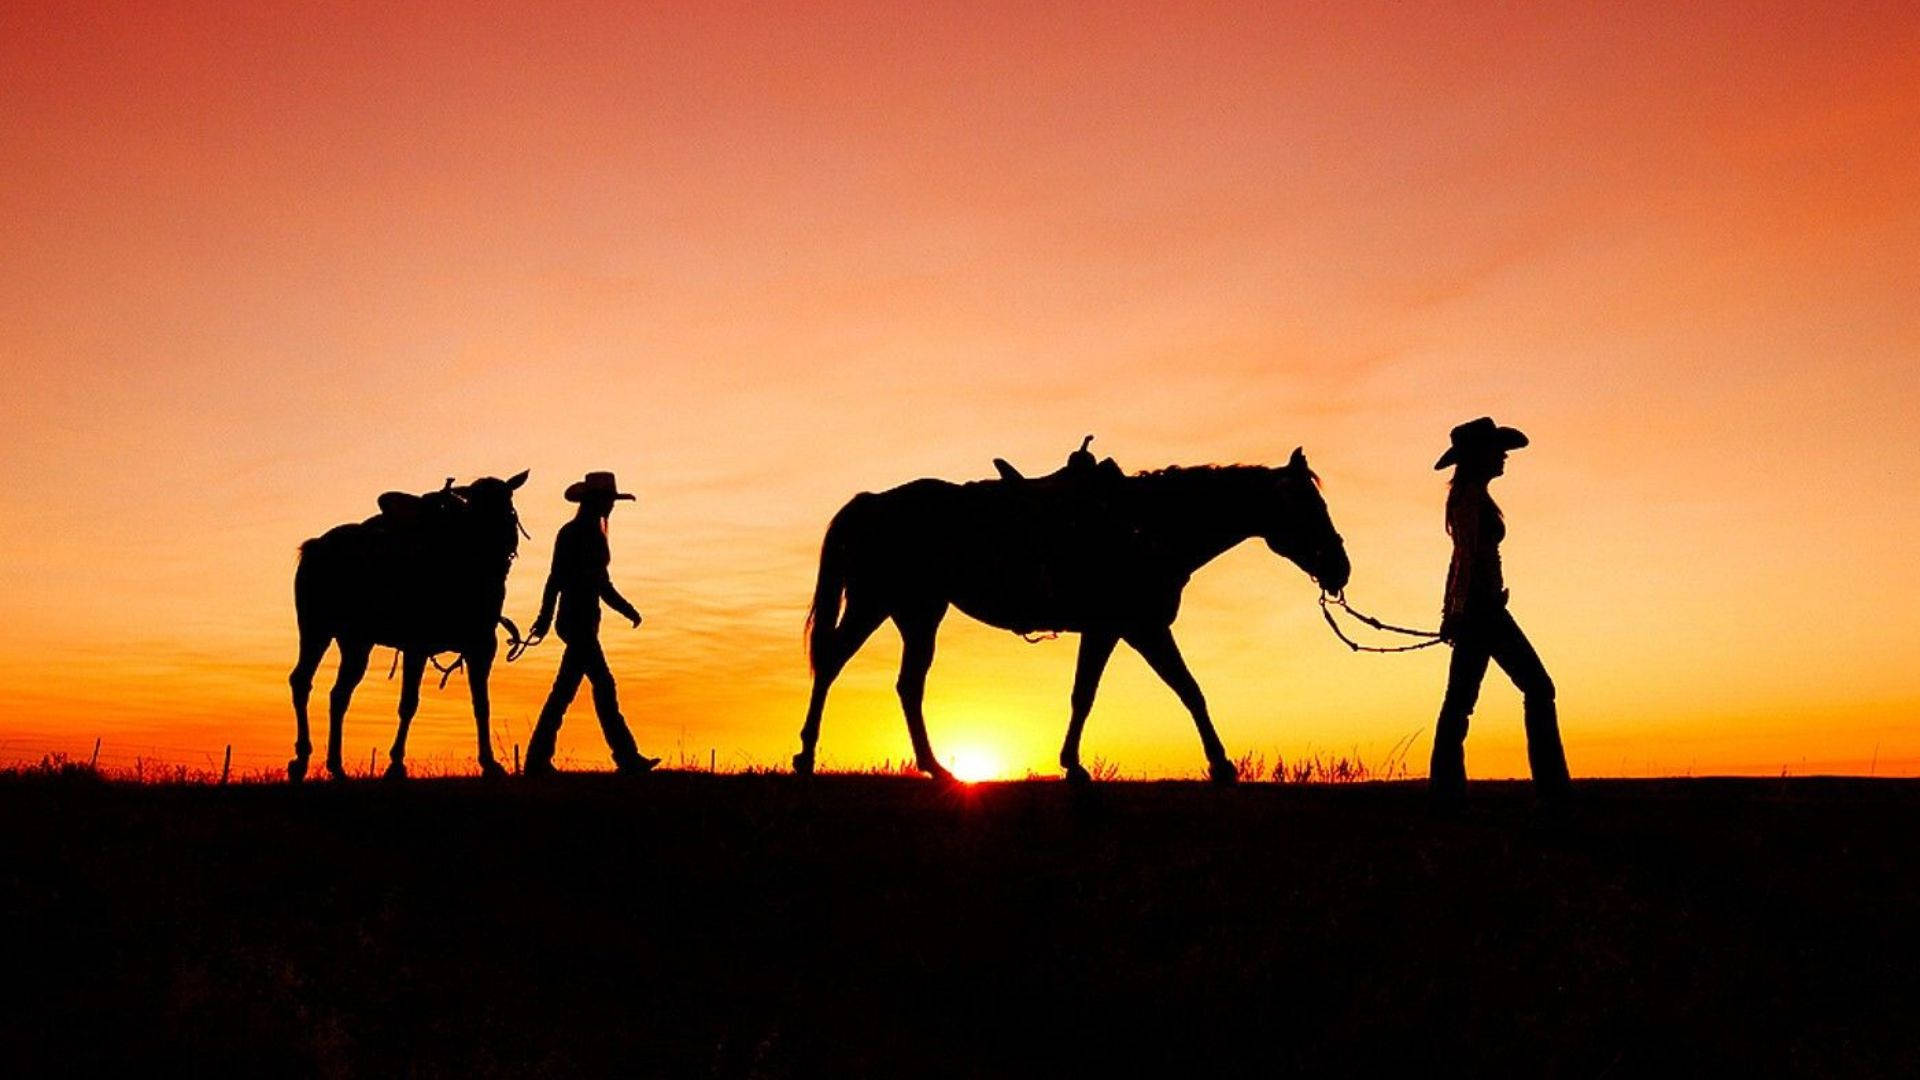 Walking Cowgirl And Horses Background